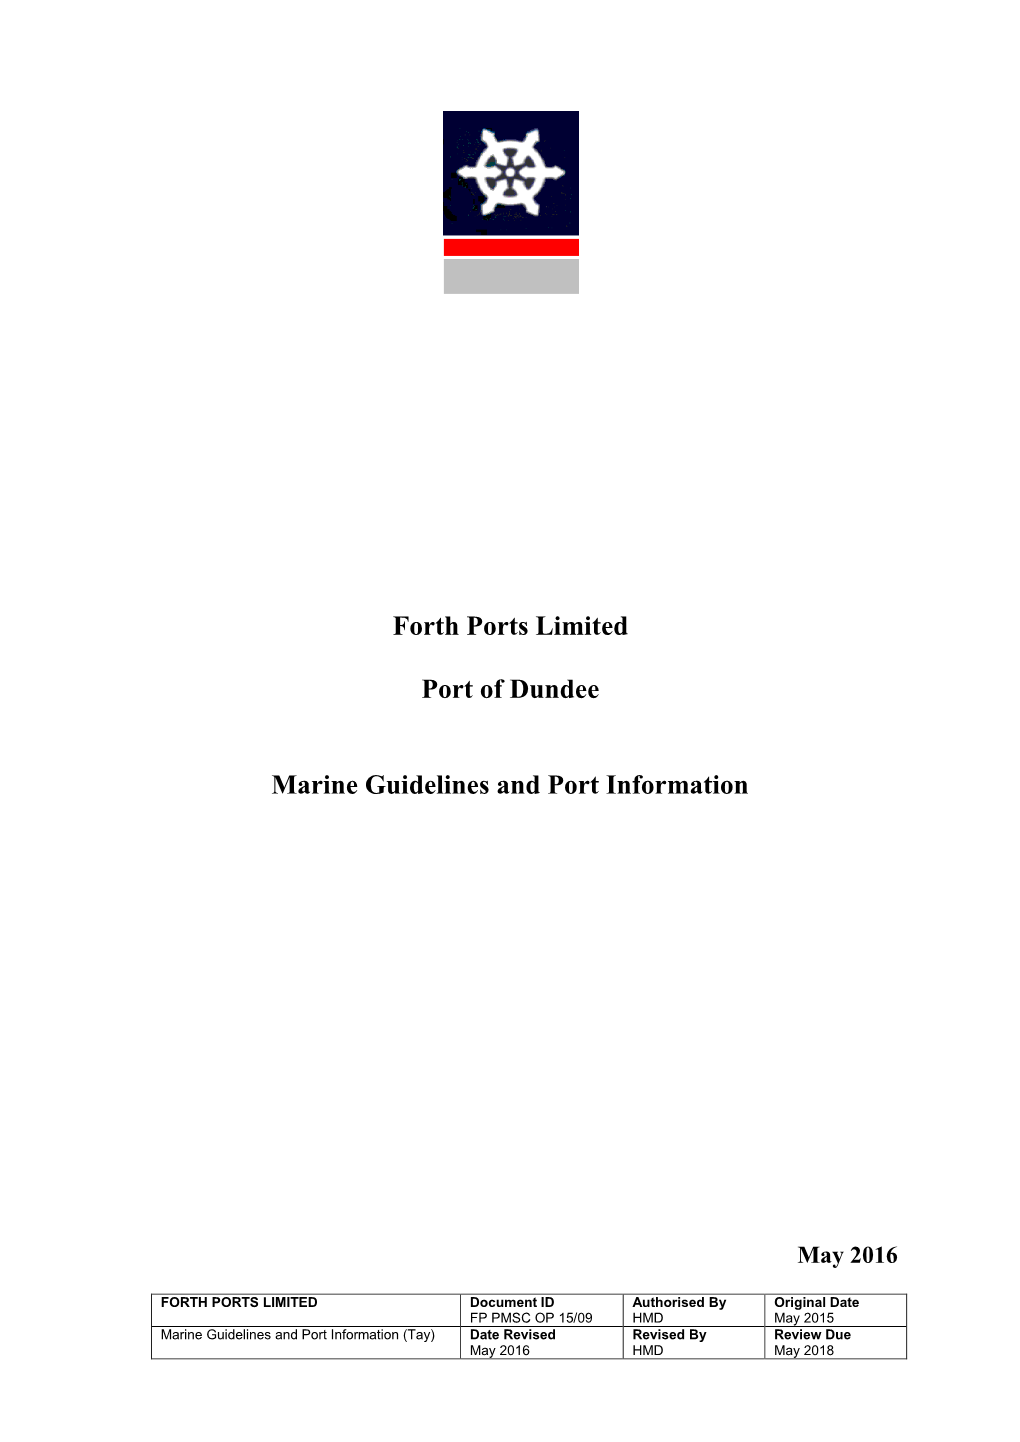 Forth Ports Limited Port of Dundee Marine Guidelines and Port